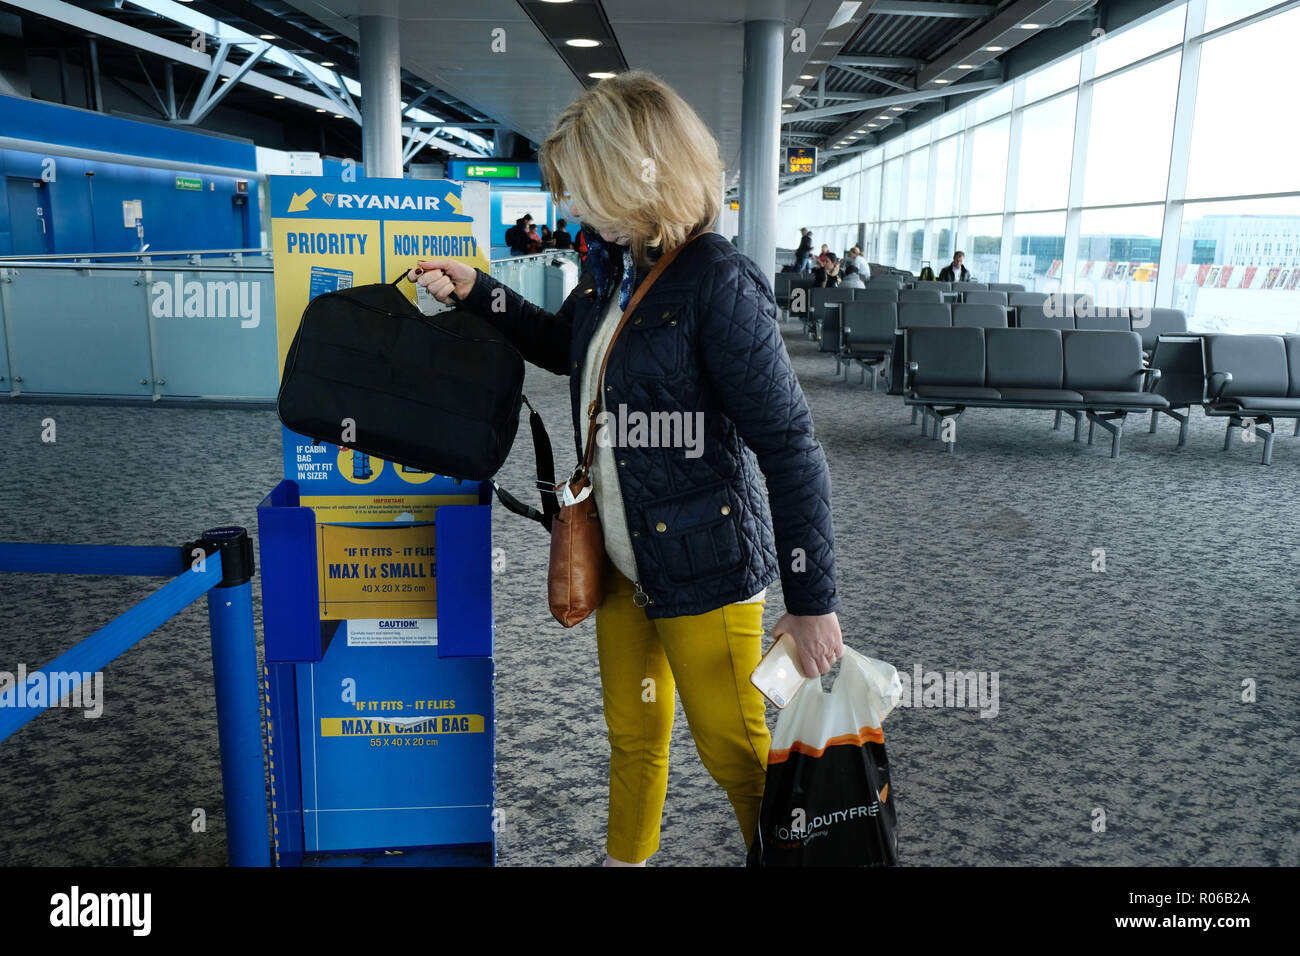 Pic shows: New tiny bag size allowed on Ryanair planes for free. Checking  sizer at all the gates to stop passengers see here at Stansted Airport. P  Stock Photo - Alamy